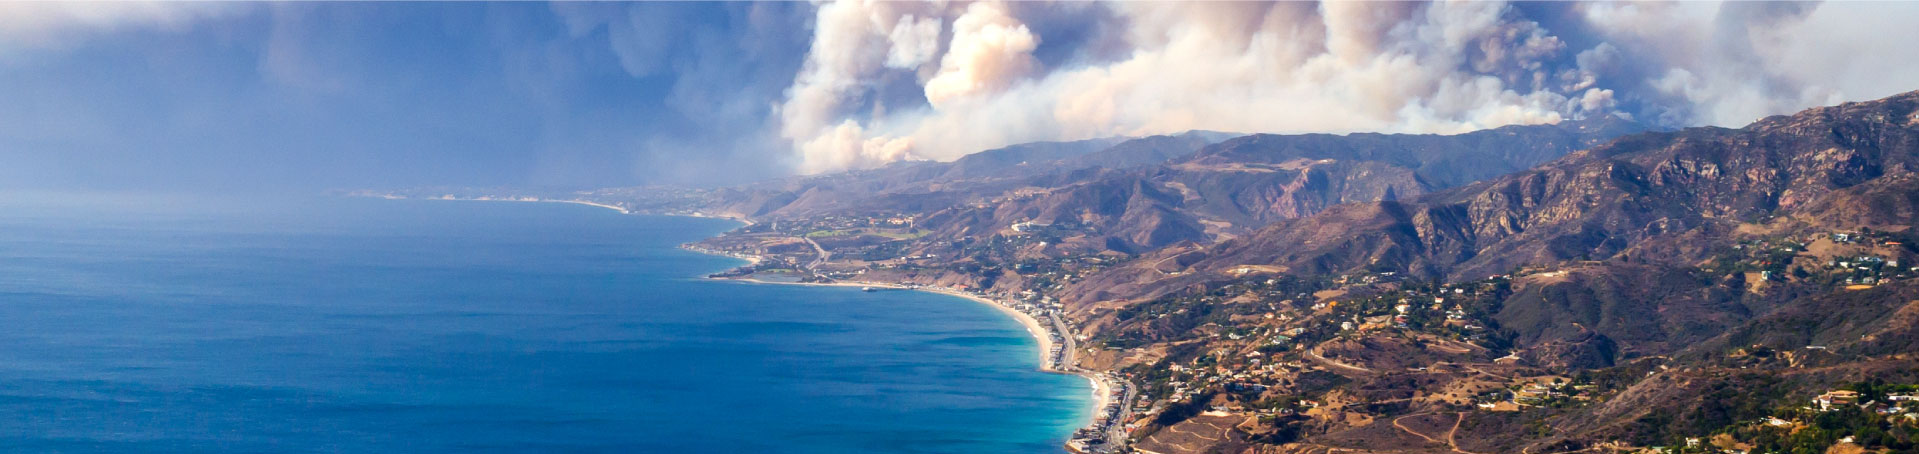 a picture of a beach with the ocean and a wildfire in the background.